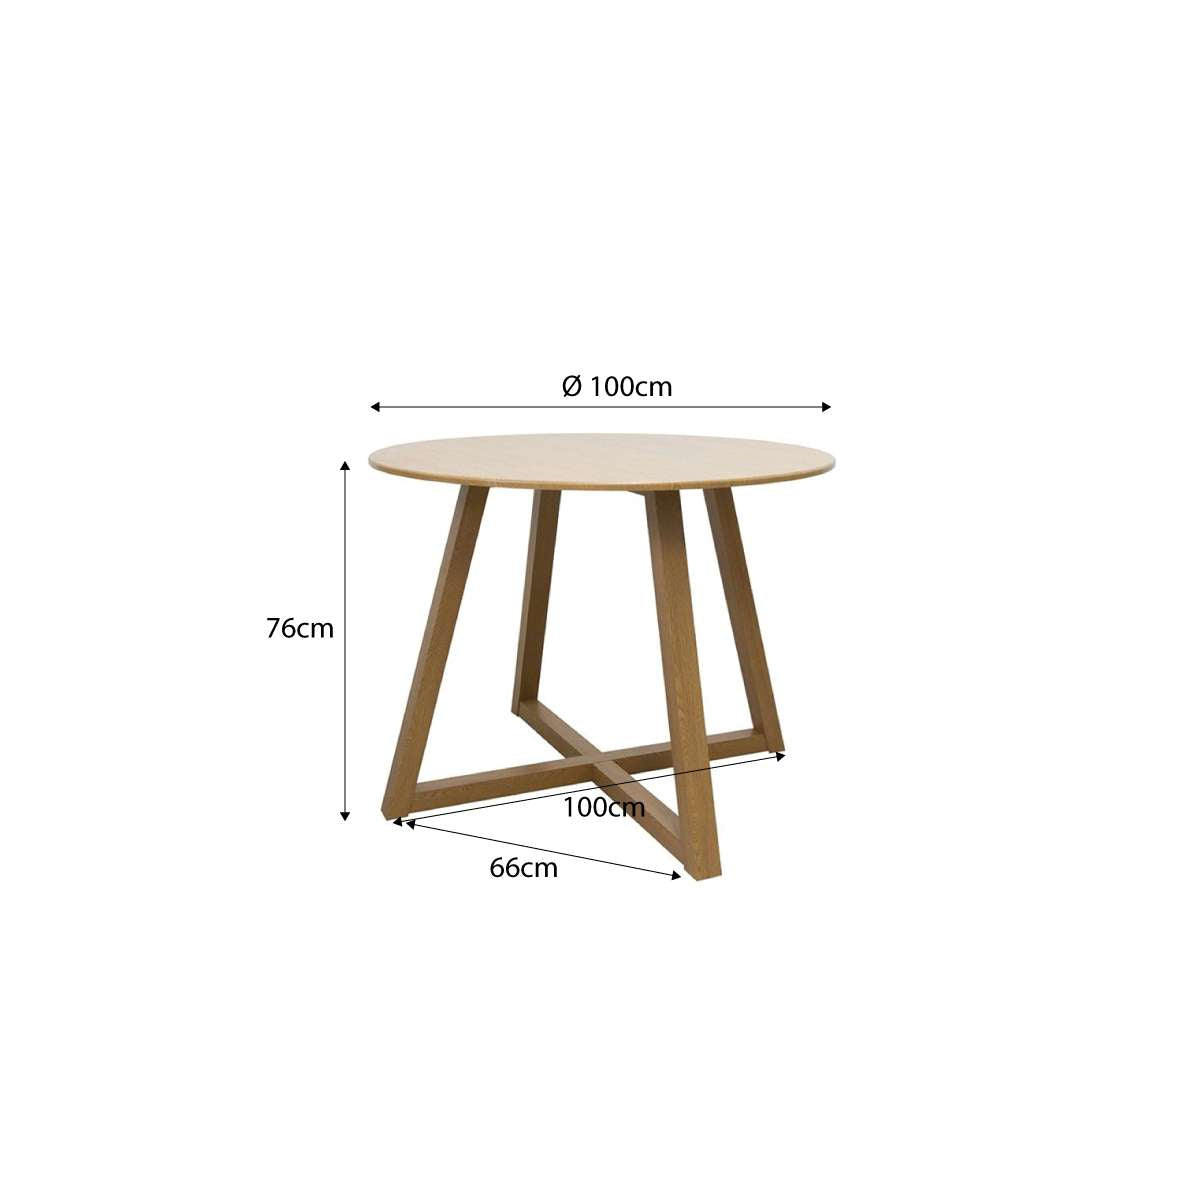 Avalon 4 Seater Dining Table - Natural